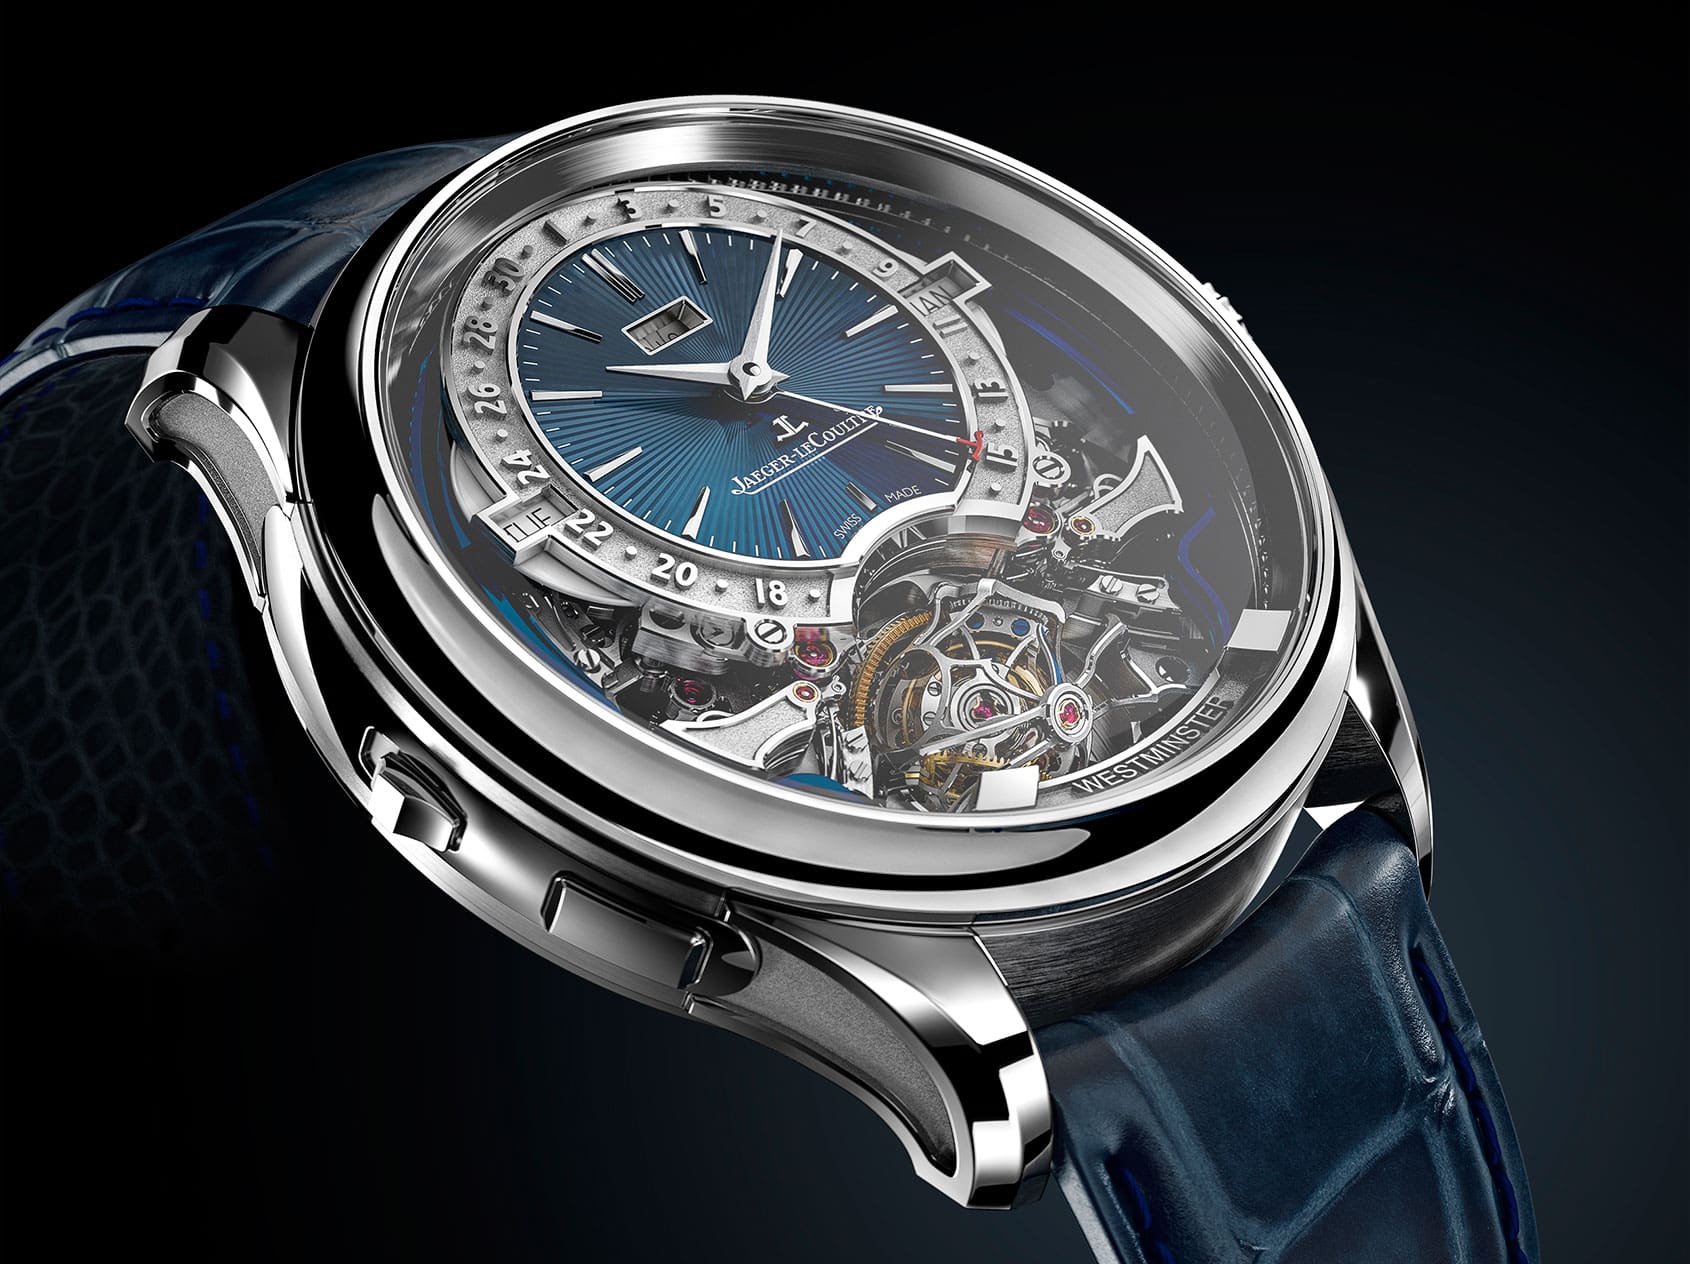 HOW TO: Get a job in the high complications department at Jaeger-LeCoultre